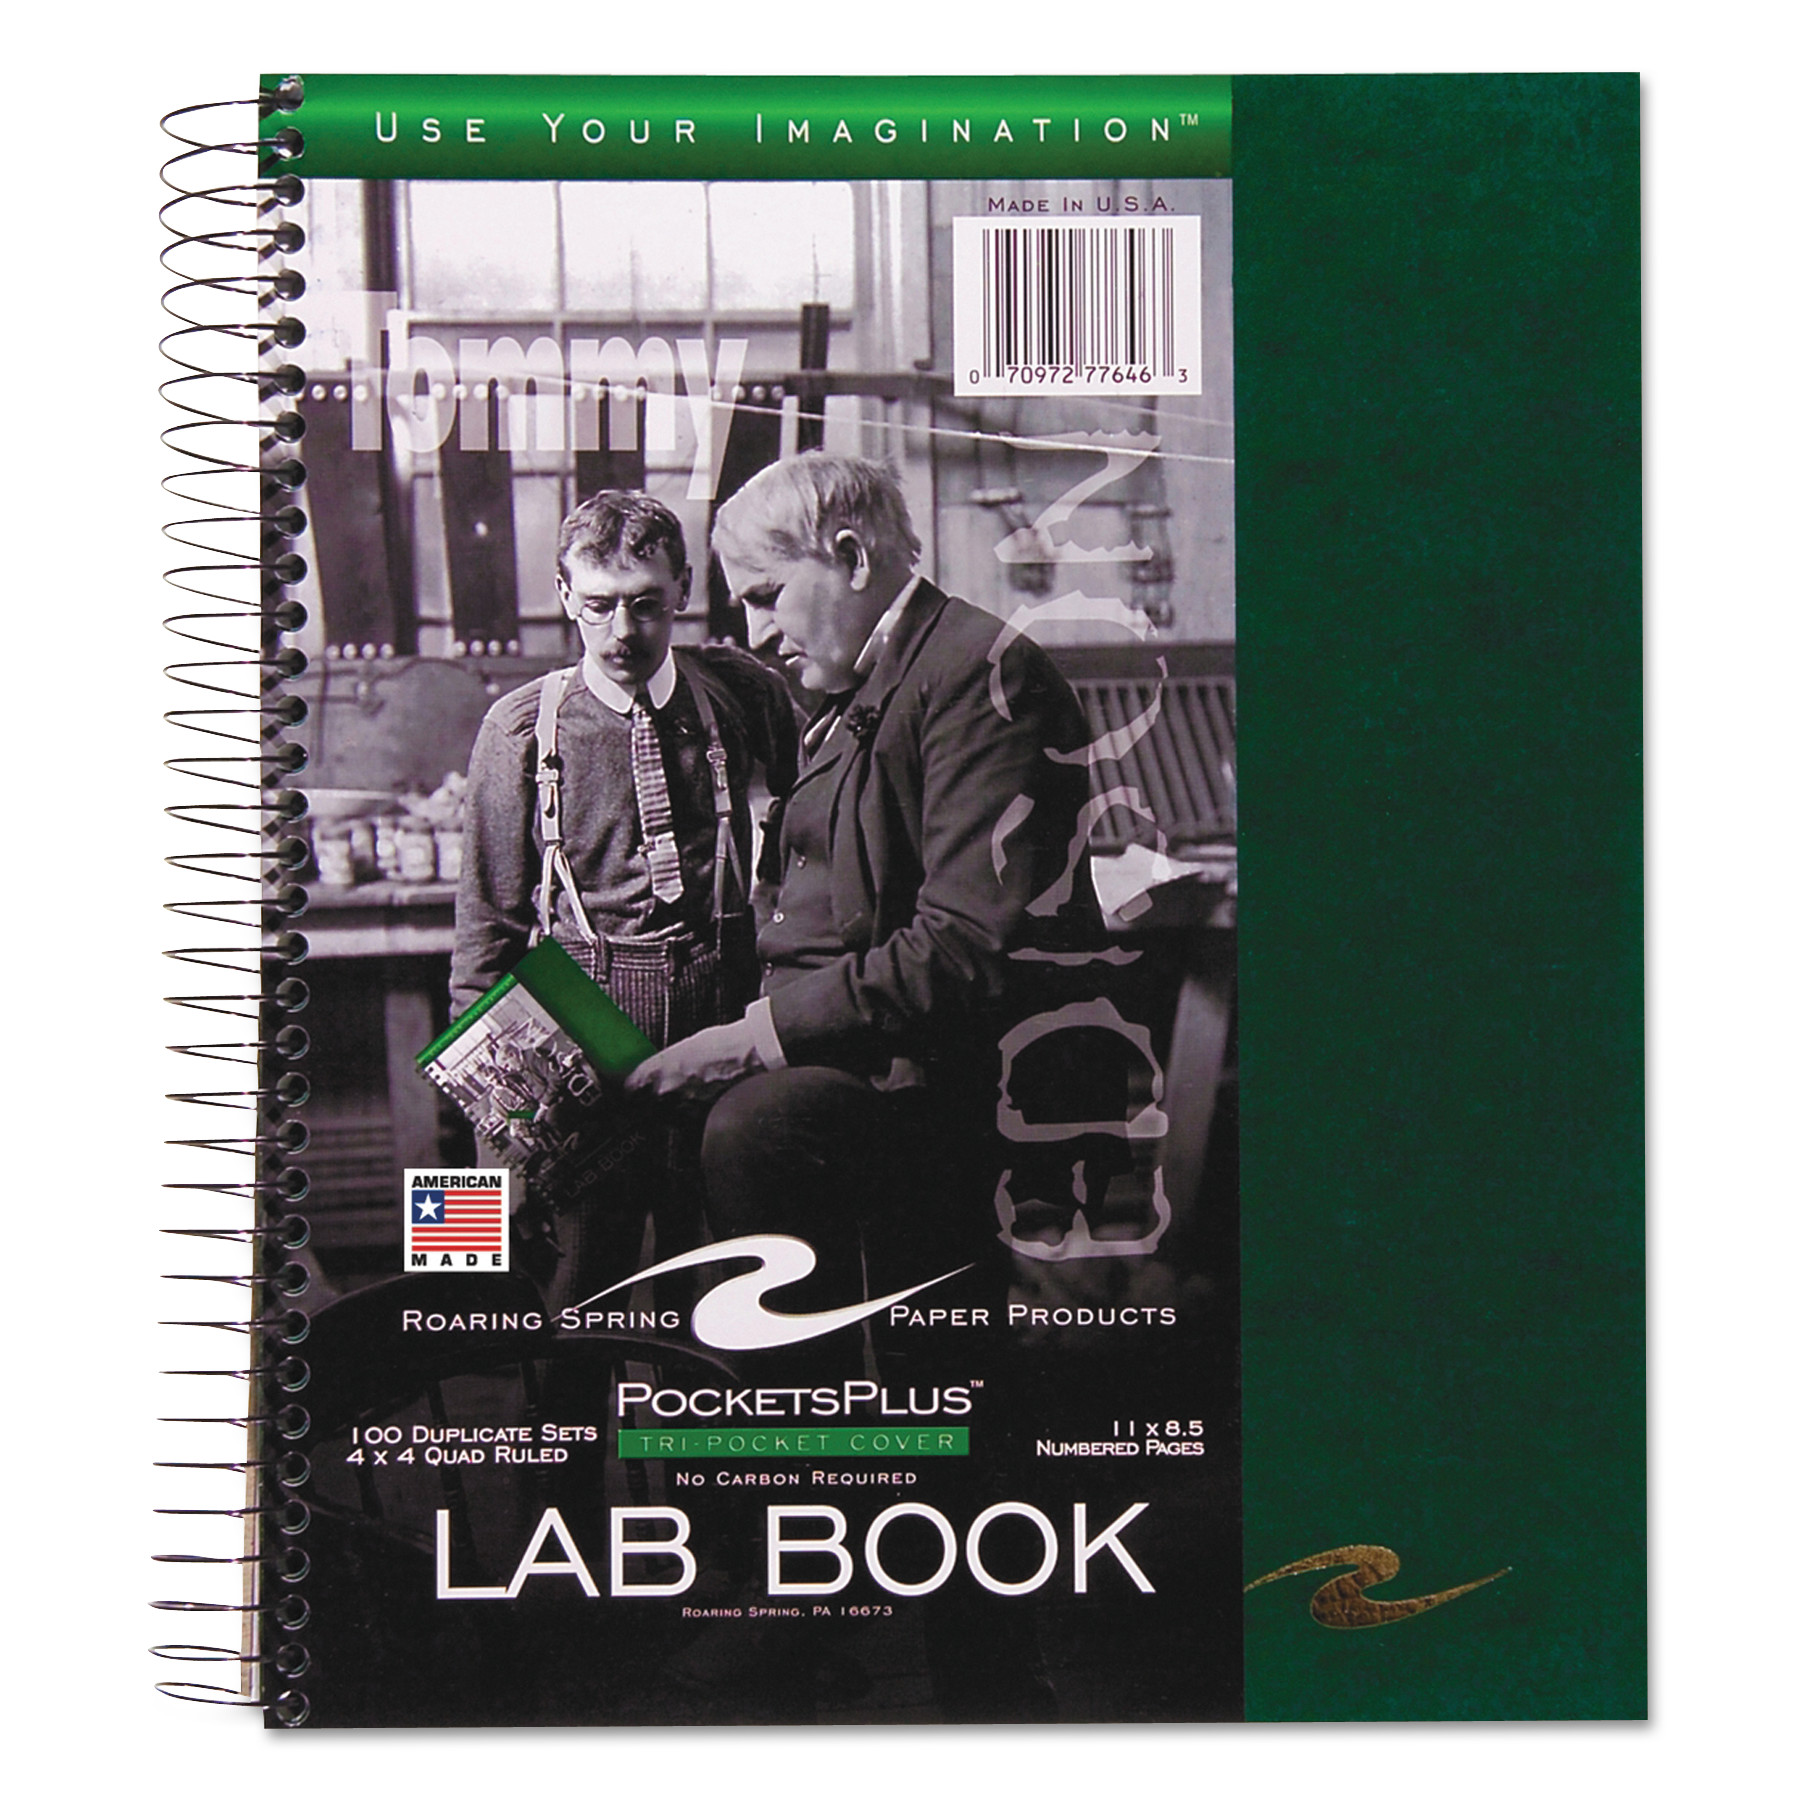  Roaring Spring 77646 Wirebound Lab Notebook, 4 sq/in Quadrille Rule, 11 x 9, White, 100 Sheets (ROA77646) 